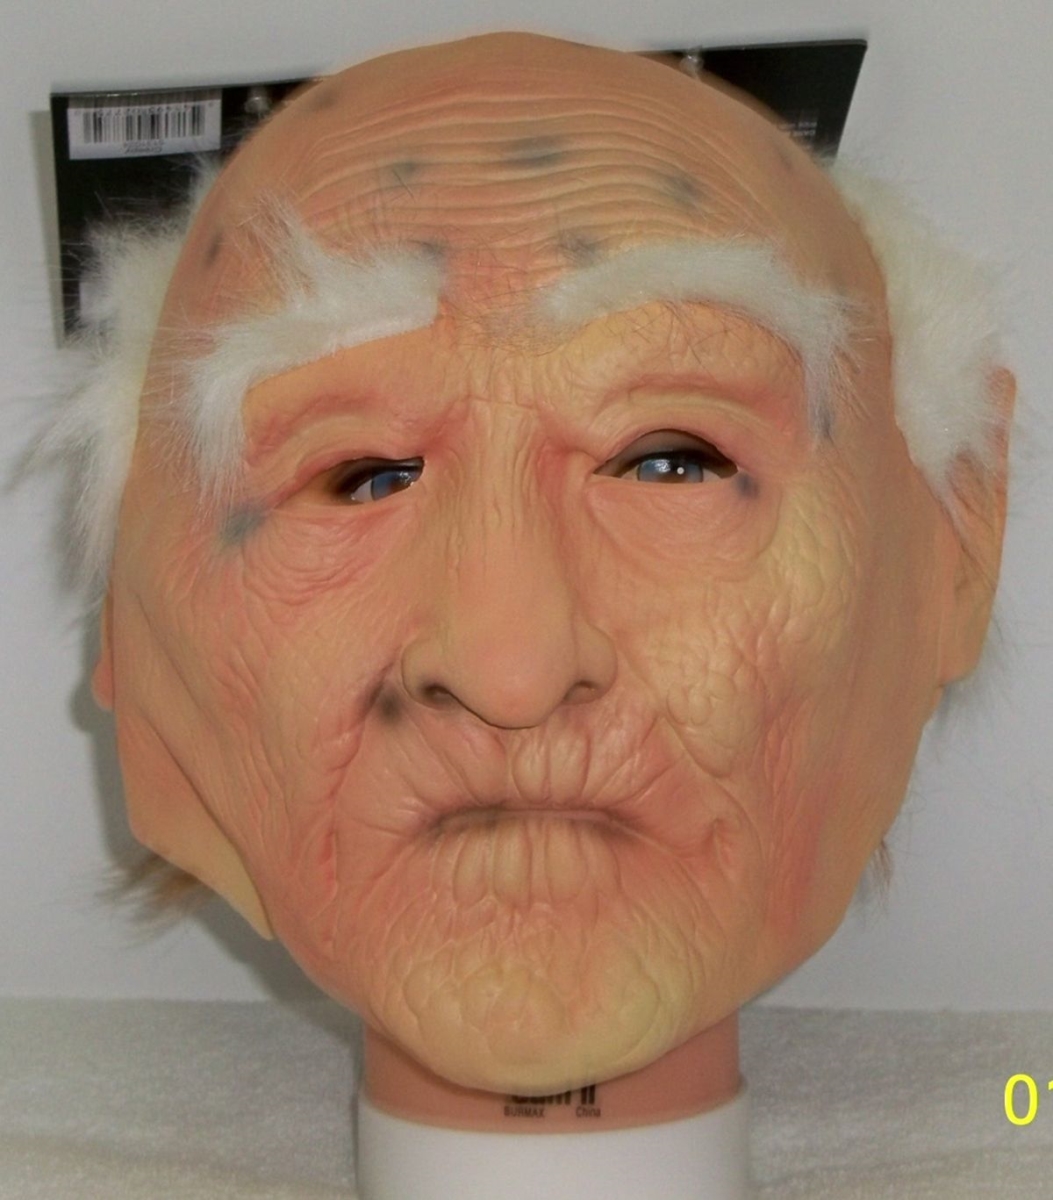 Picture of Morris MR131024 Creepy Old Man Mask with Hair